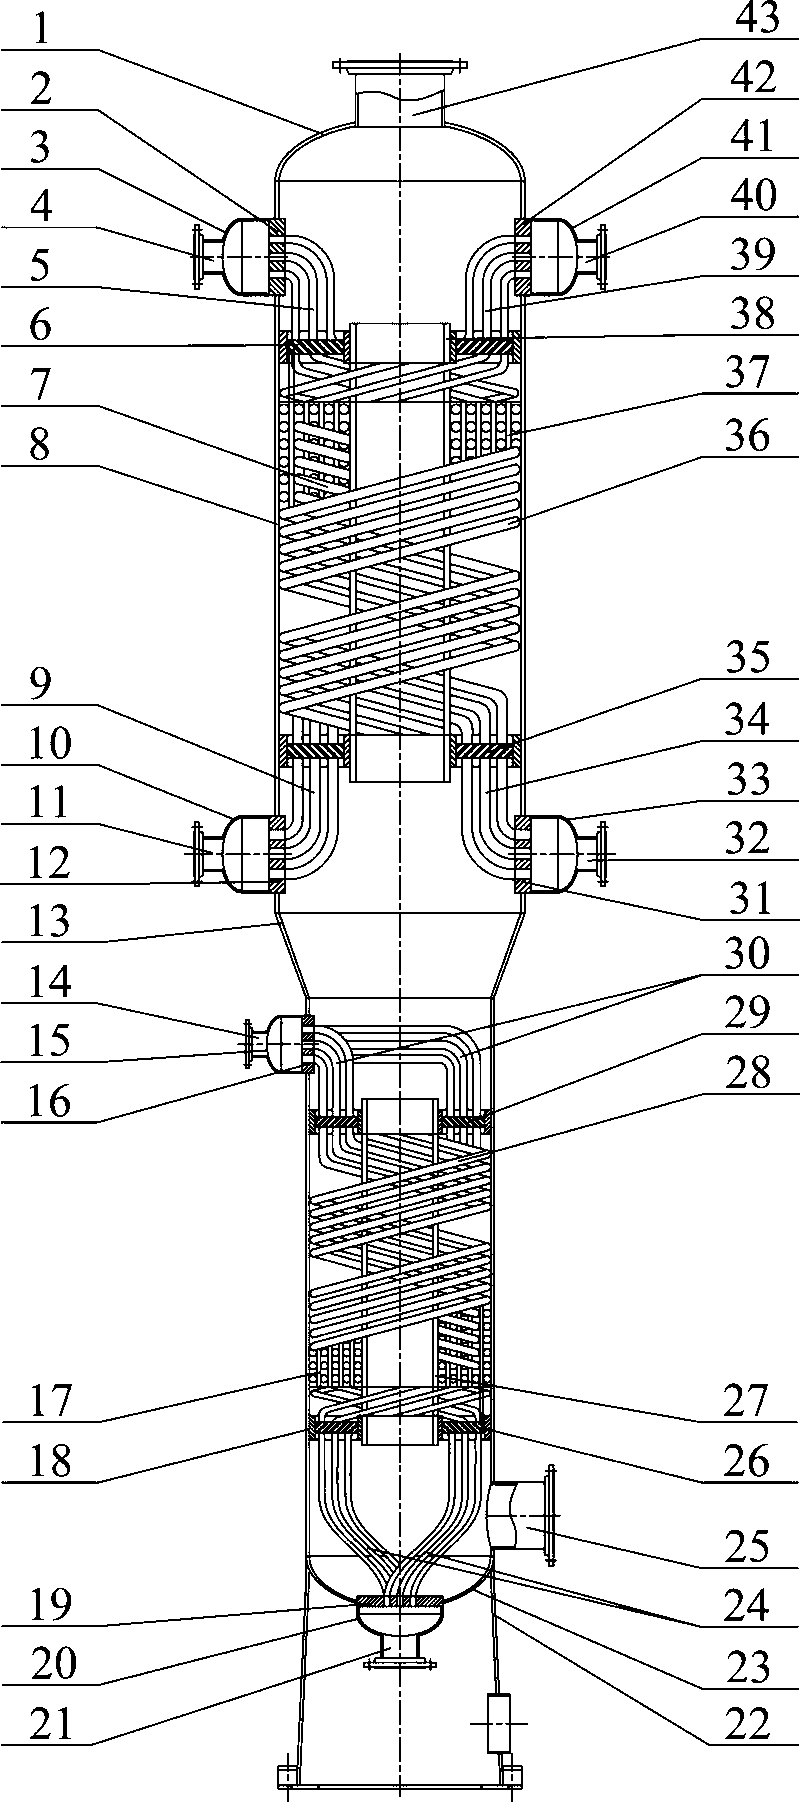 Low-temperature spiral wound heat exchanger for non-converted gas cooler